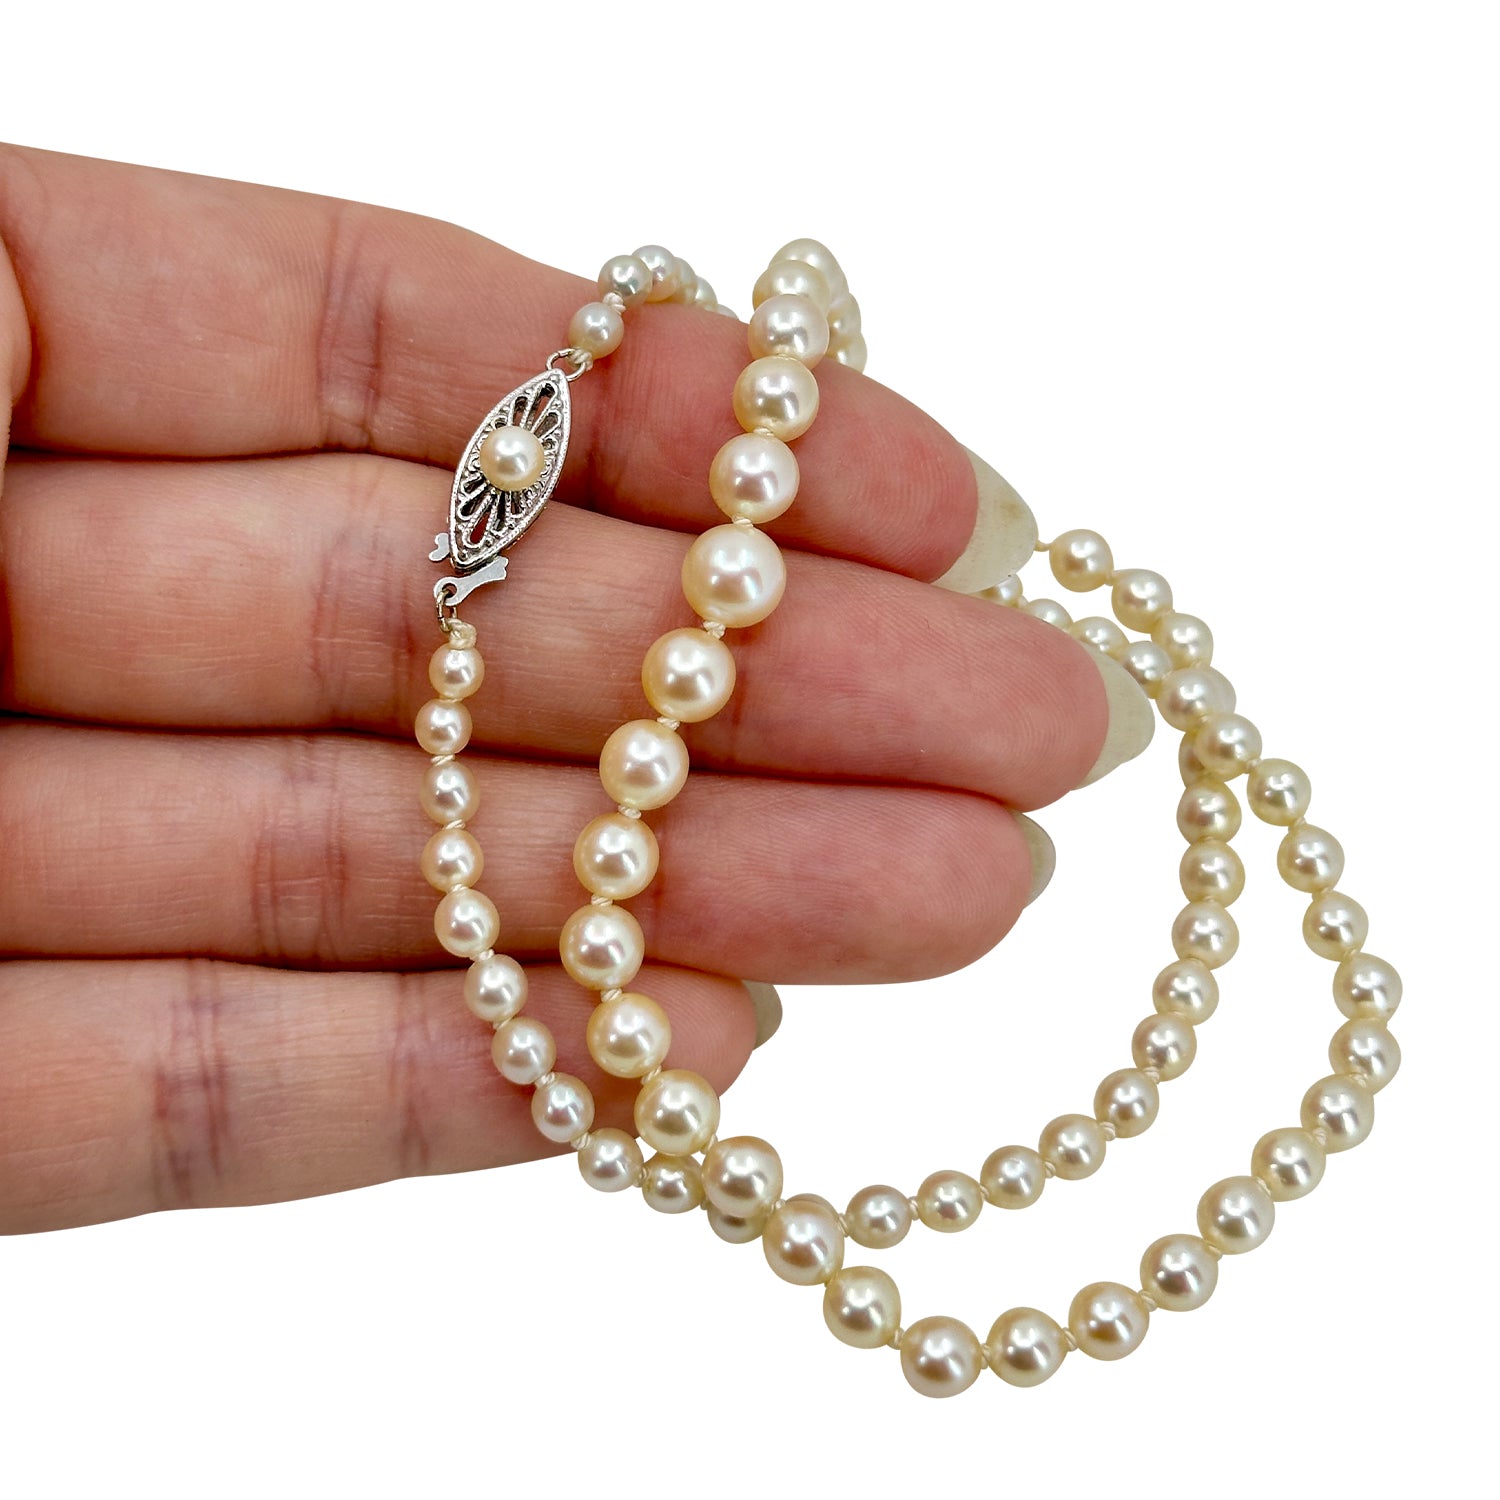 Quality Rosy Filigree Mid-Century Cultured Akoya Pearl Necklace Strand - 14K White Gold 17 Inch